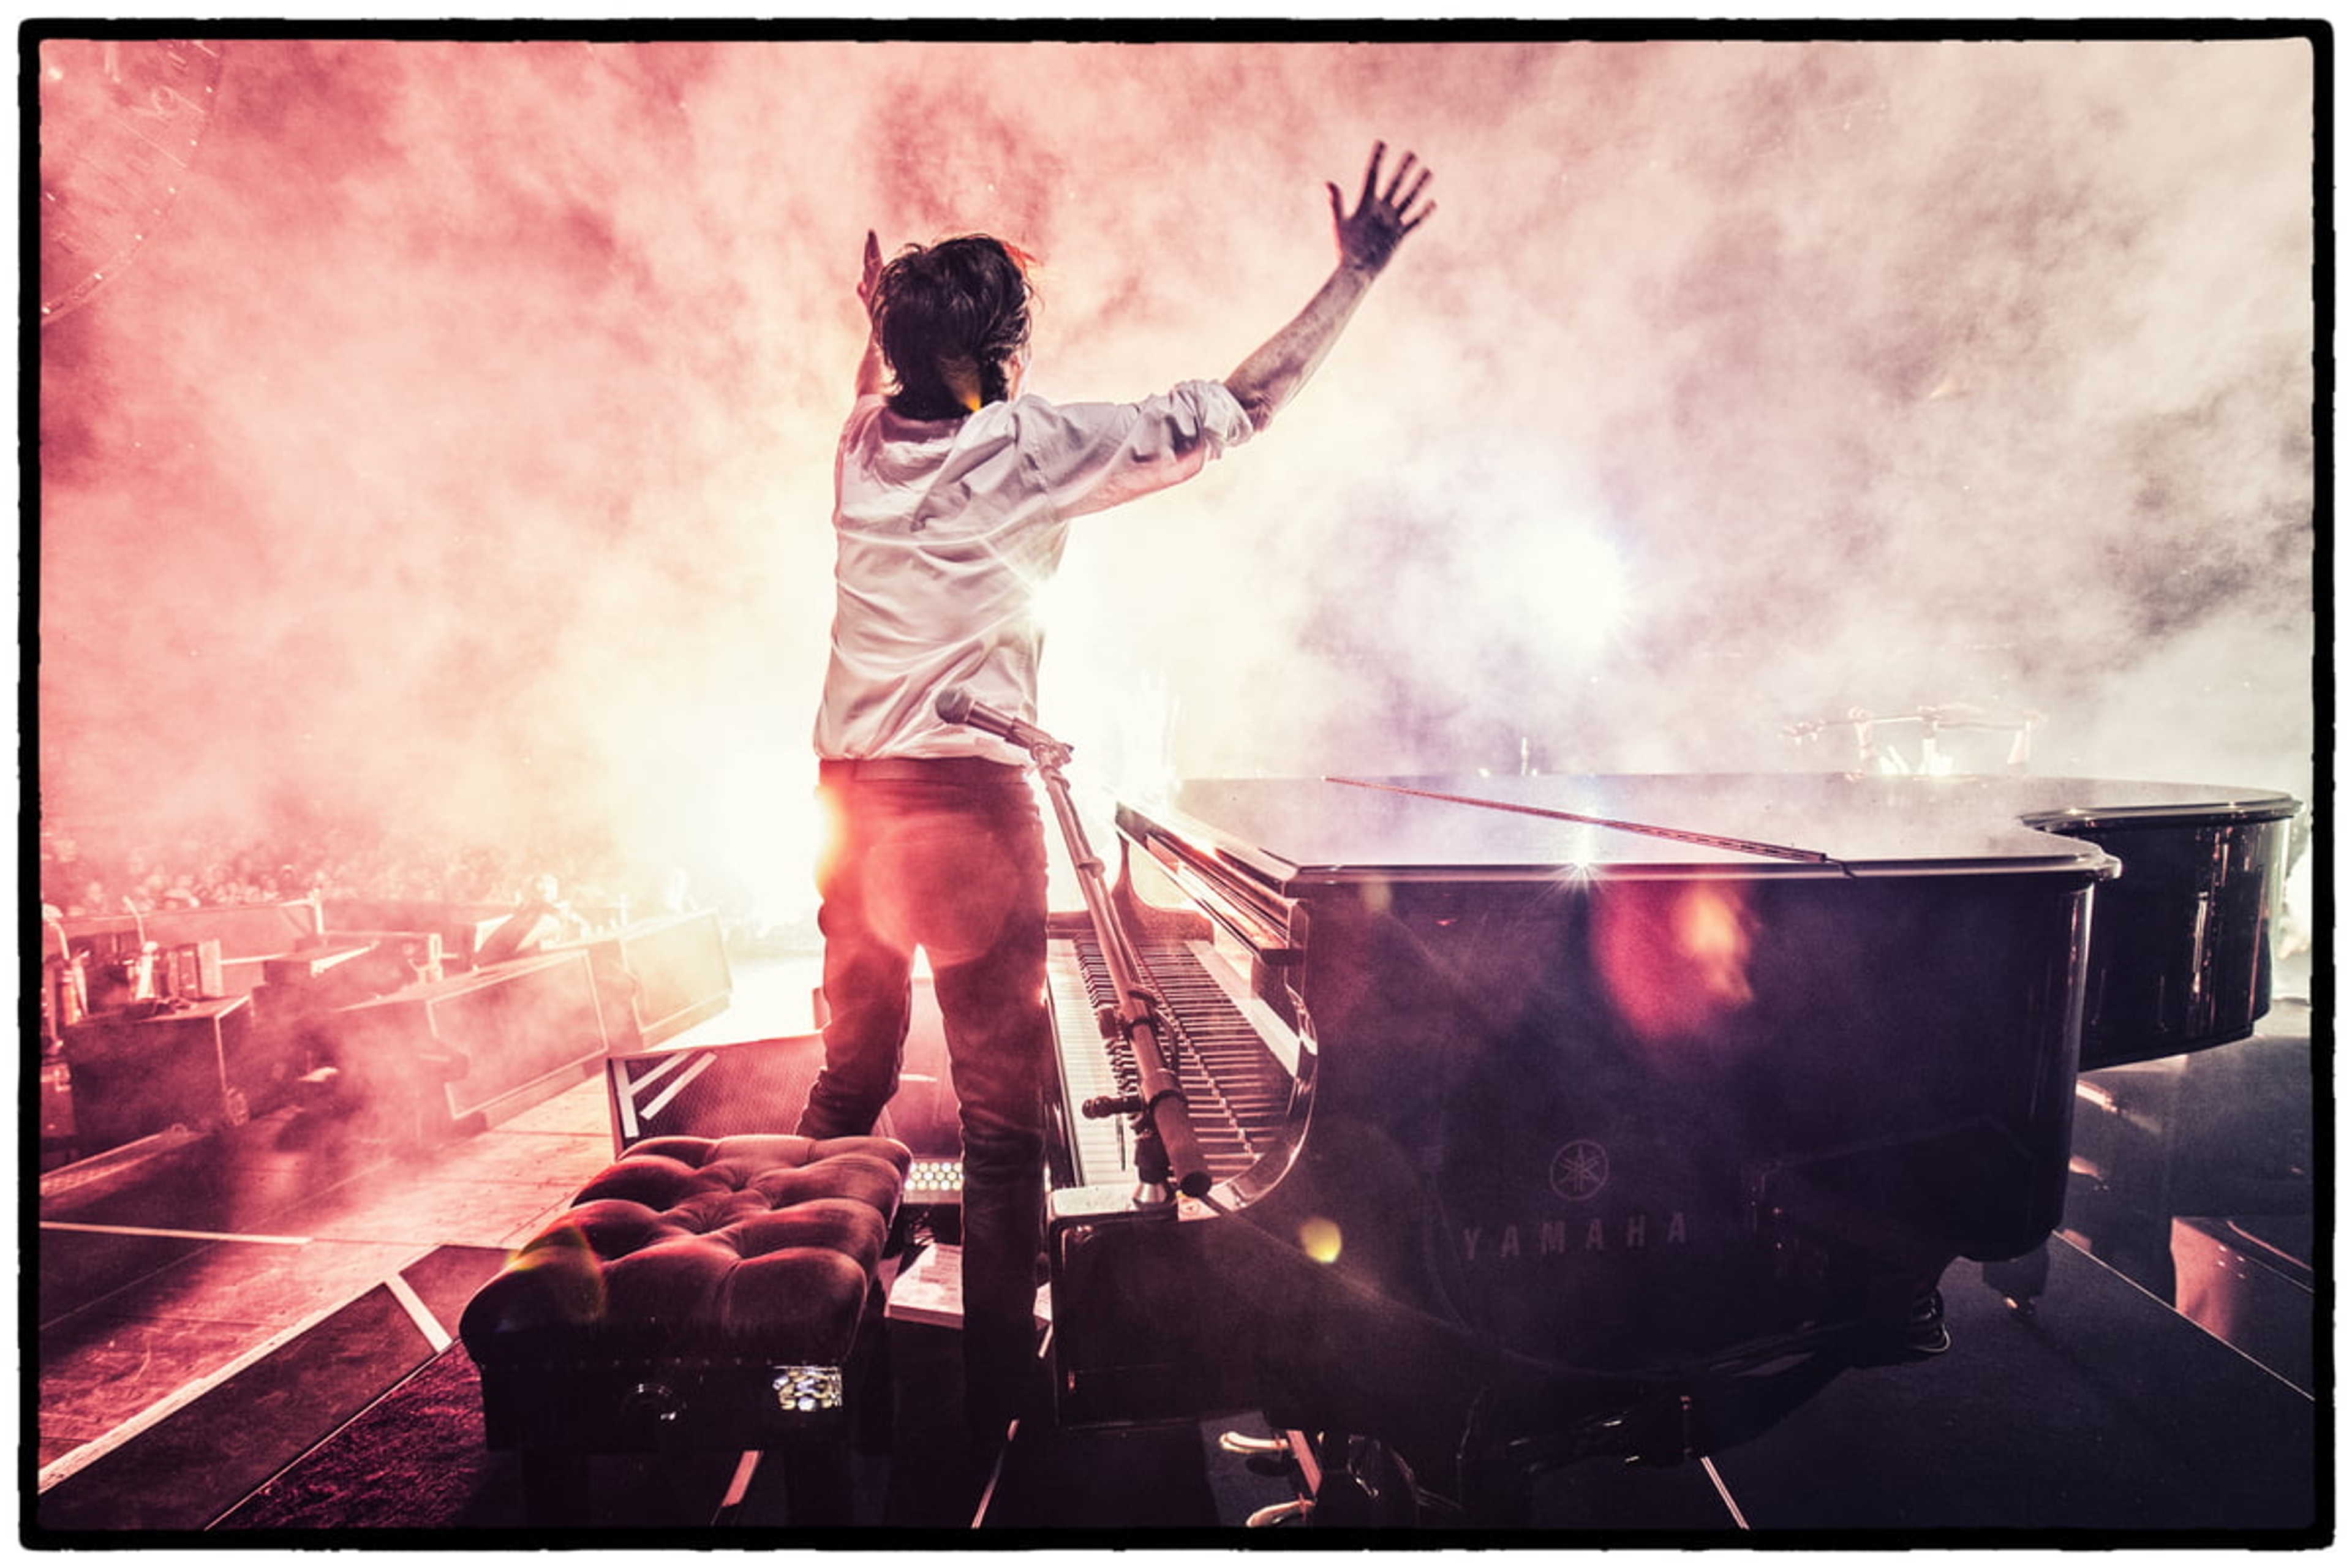 Paul at his piano during 'Live and Let Die', National Stadium, Warsaw, 22nd June 2013